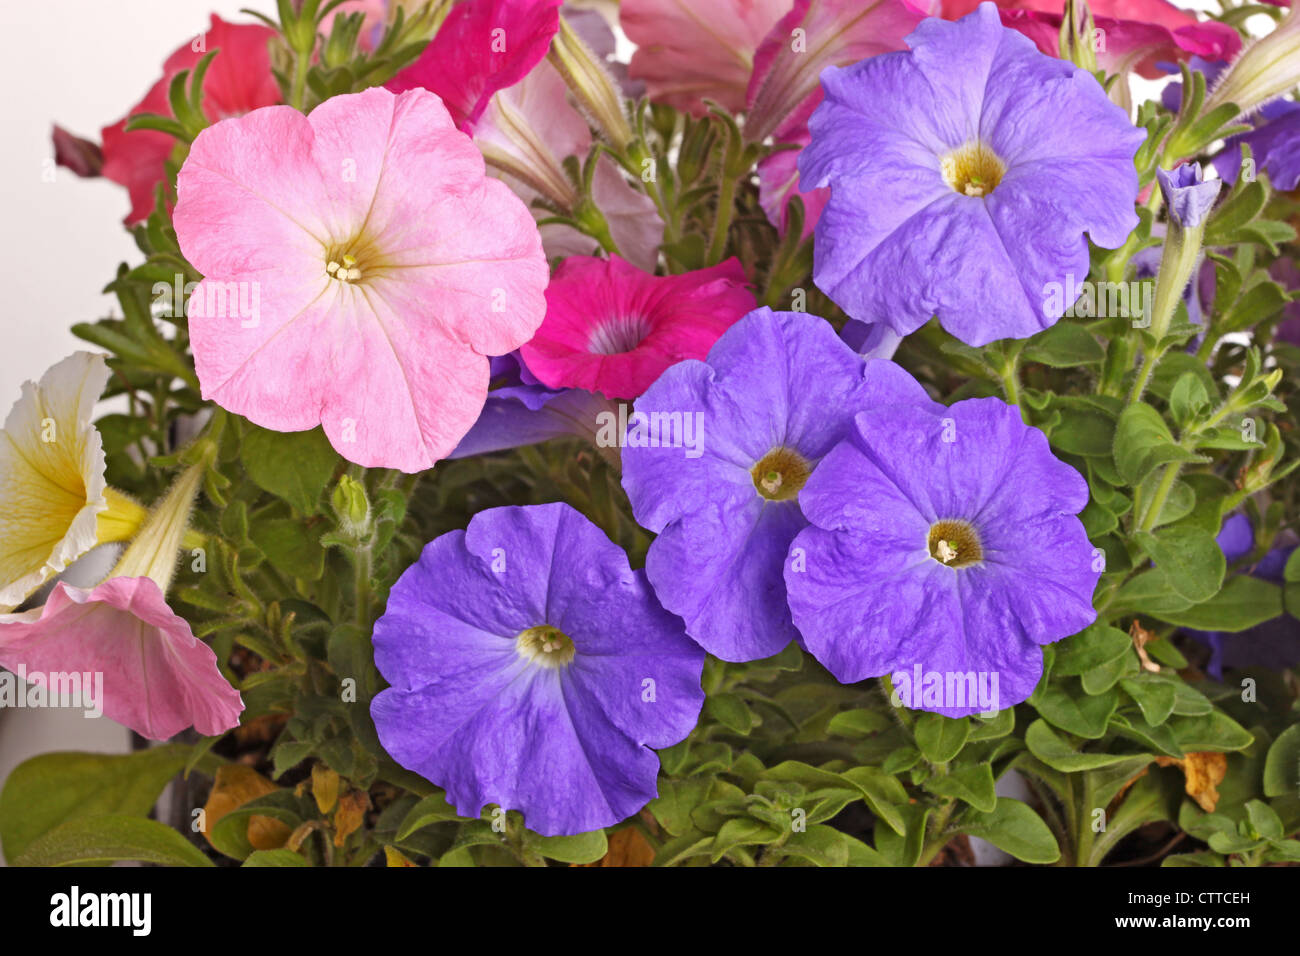 Multiple flowers of pink, purple and red petunias (Petunia hybrida) fill the frame Stock Photo